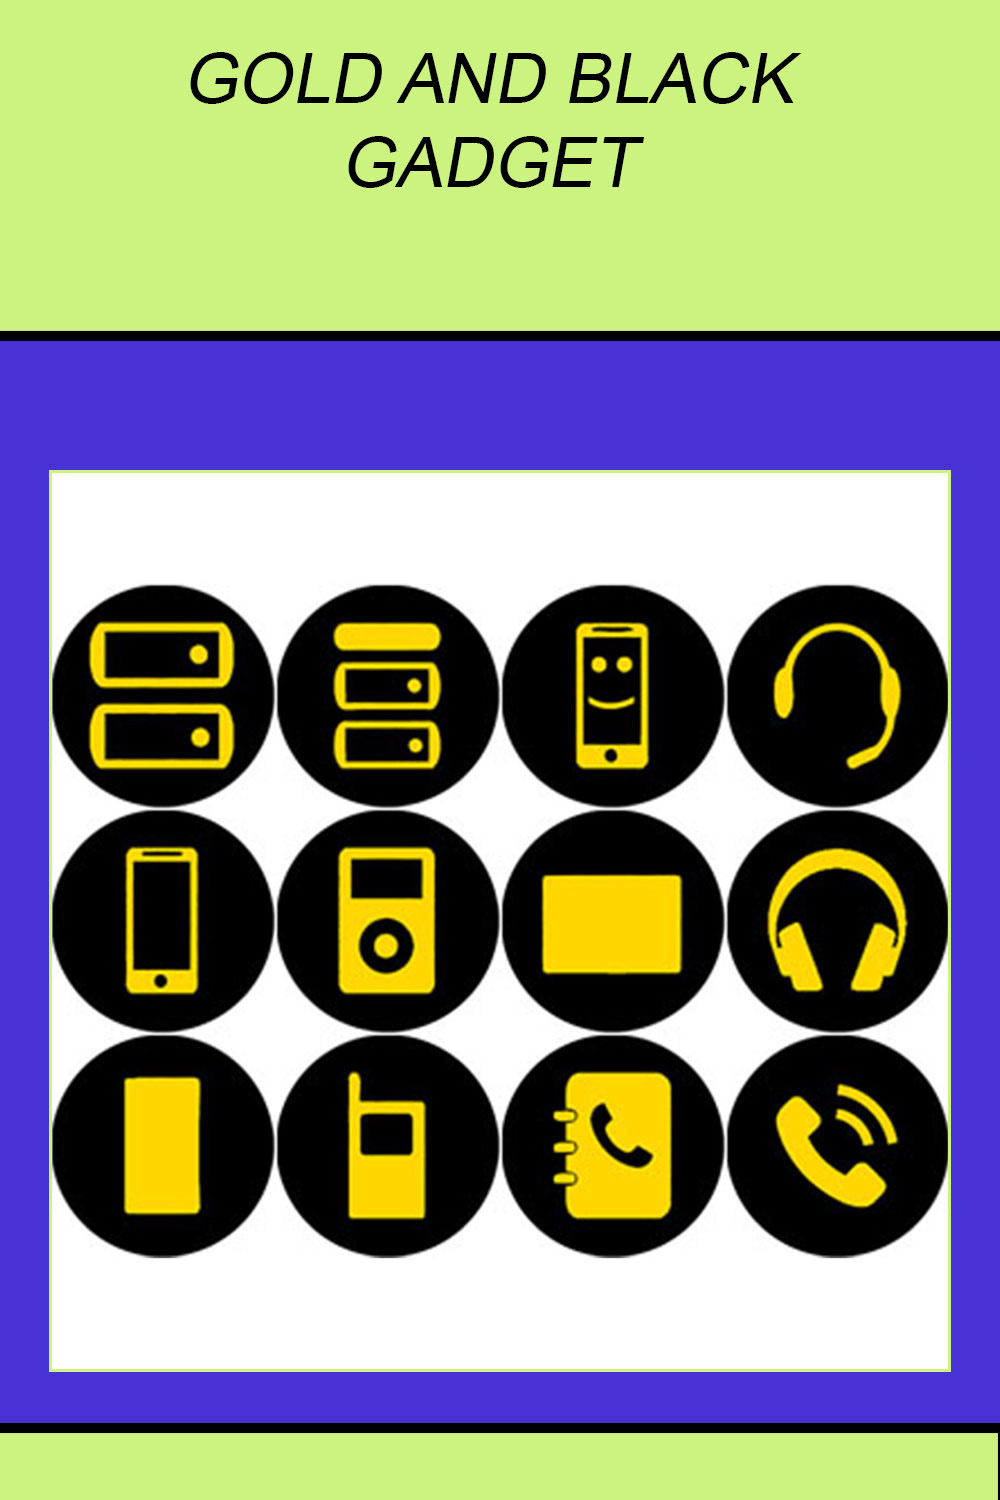 GOLD AND BLACK GADGET ROUND ICONS pinterest preview image.